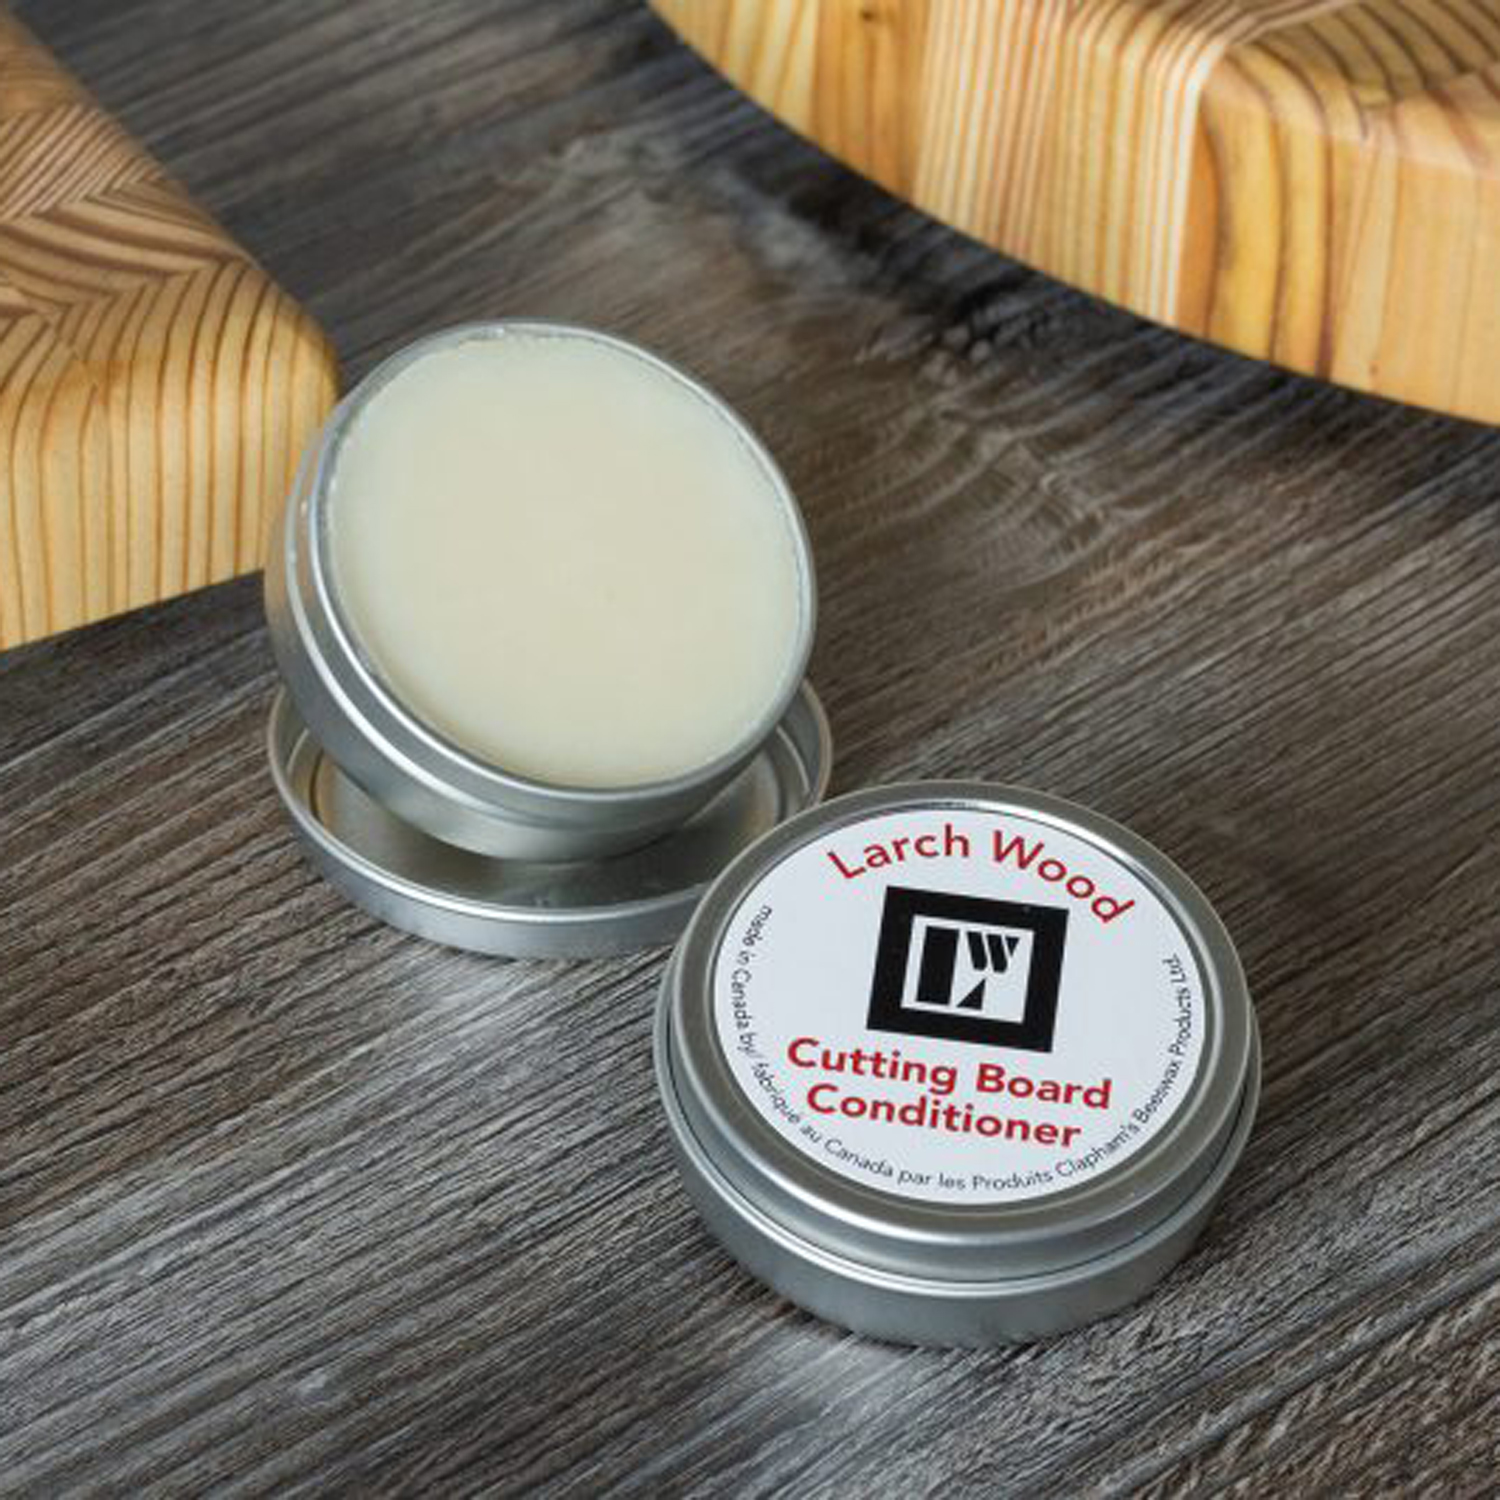 Larch Wood: Cutting Board Conditioner Product Image 3 of 3